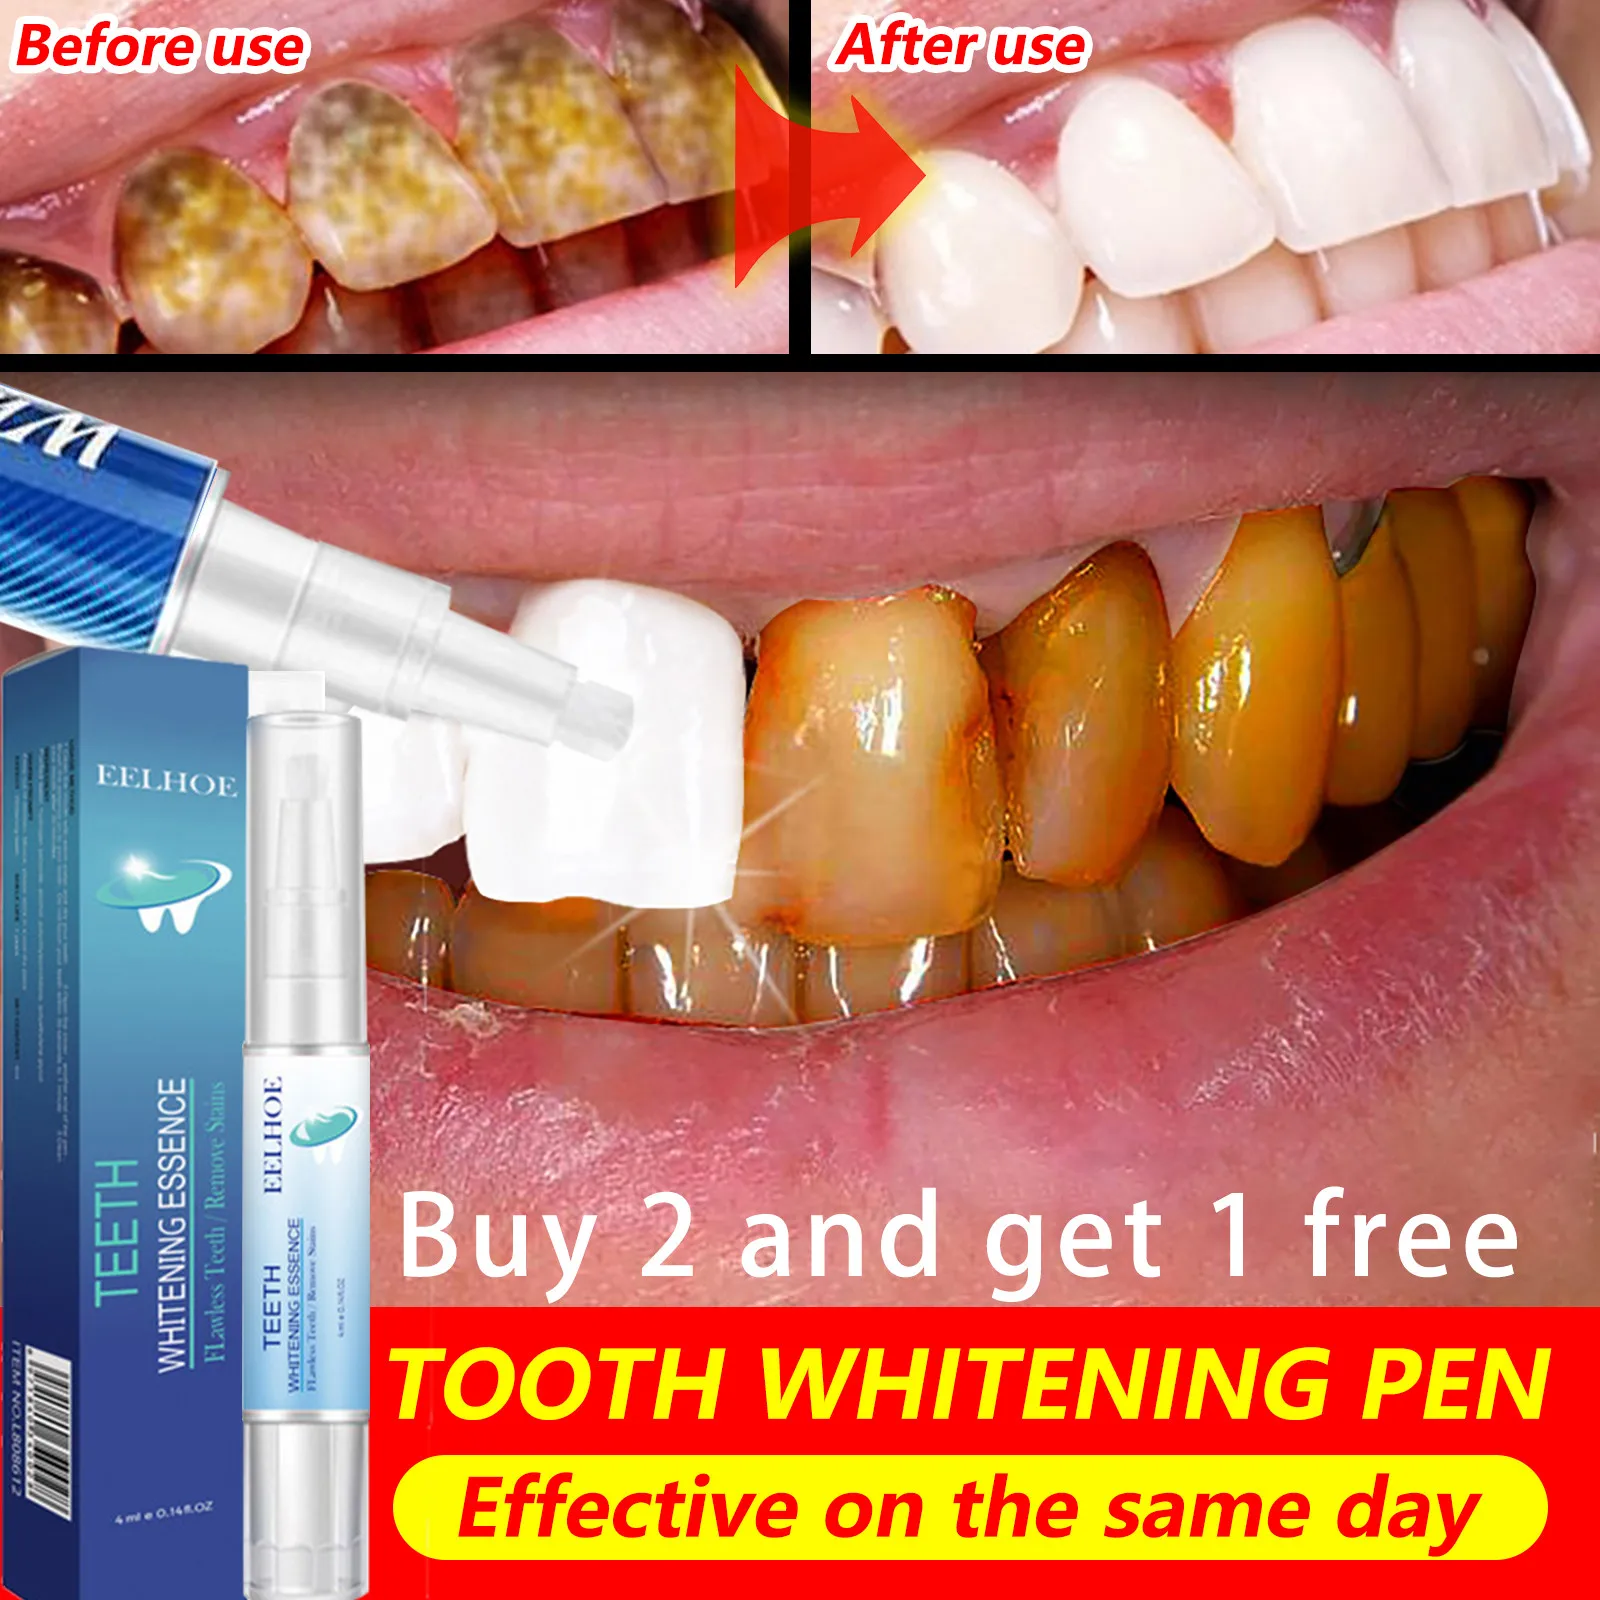 New In Teeth Whitening Pen Whitener Bleach Essence Gel Remove Plaque Stains Instant Smile Tooth Cleaning Serum Kit Beauty Health